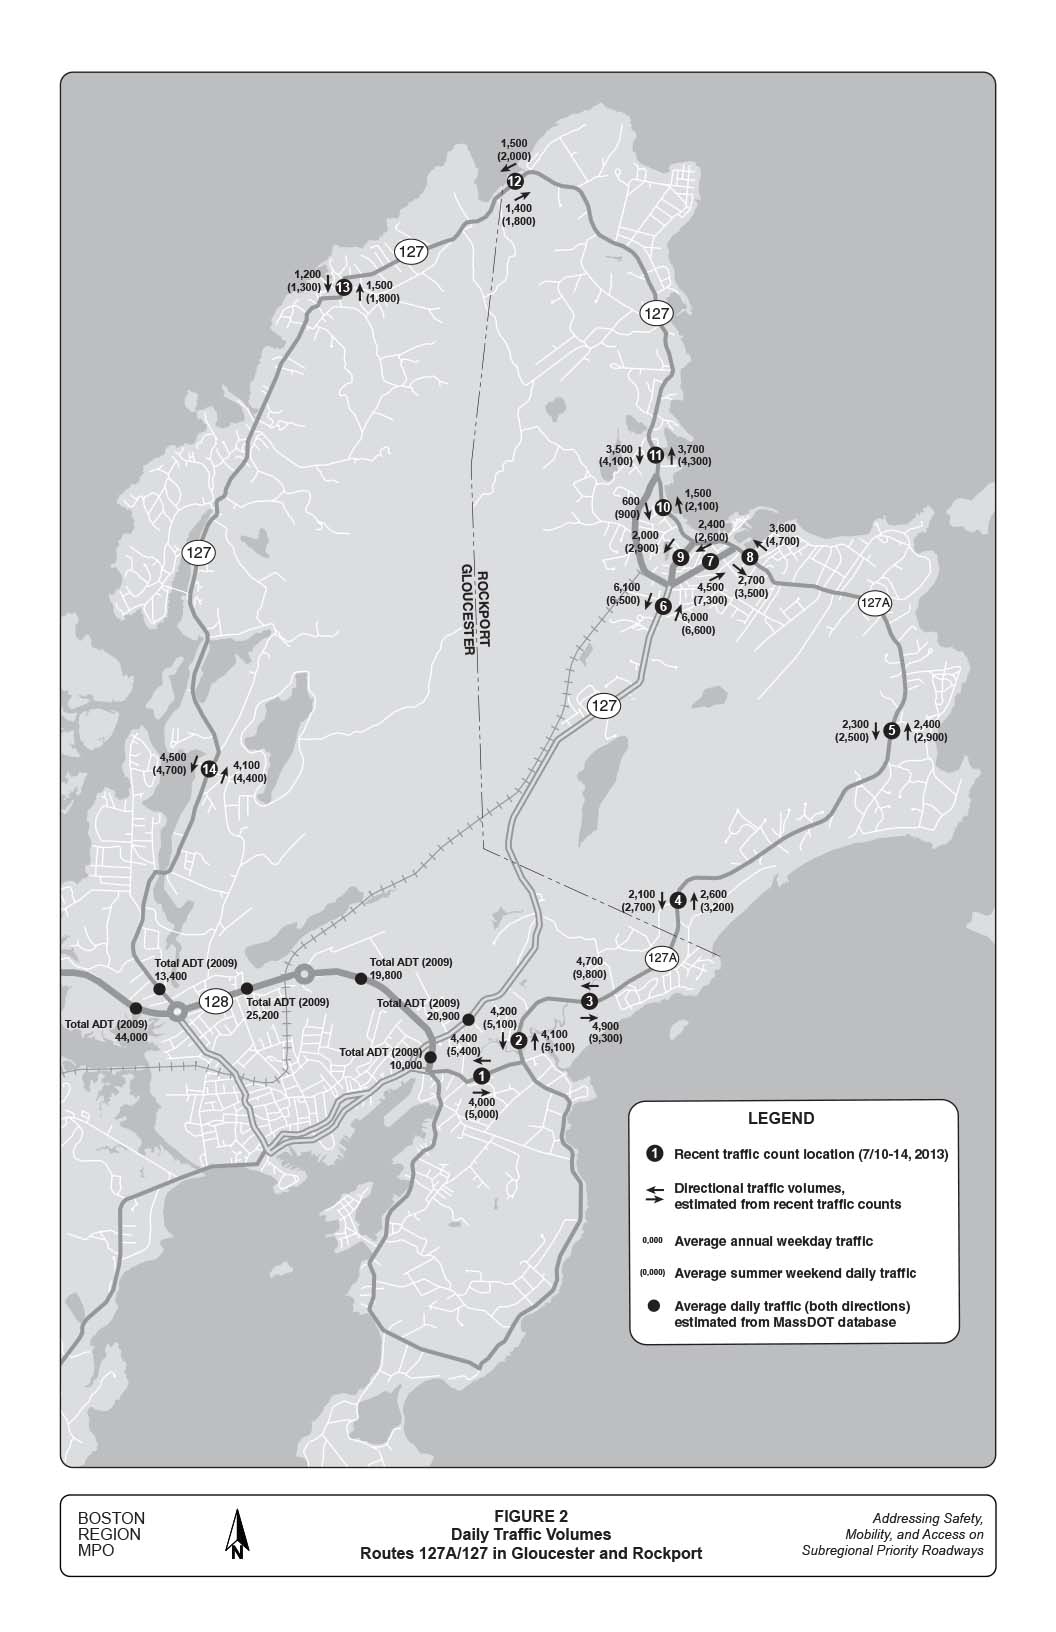 FIGURE 2. Daily Traffic Volumes Routes 127A/127 in Gloucester and Rockport
This black-and-white map of the study area depicts: Recent traffic count location (7/10-14, 2013); directional traffic volumes, estimated from recent traffic counts; average annual weekday traffic; average summer weekend daily traffic; and average daily traffic (both directions), estimated from MassDOT database.
